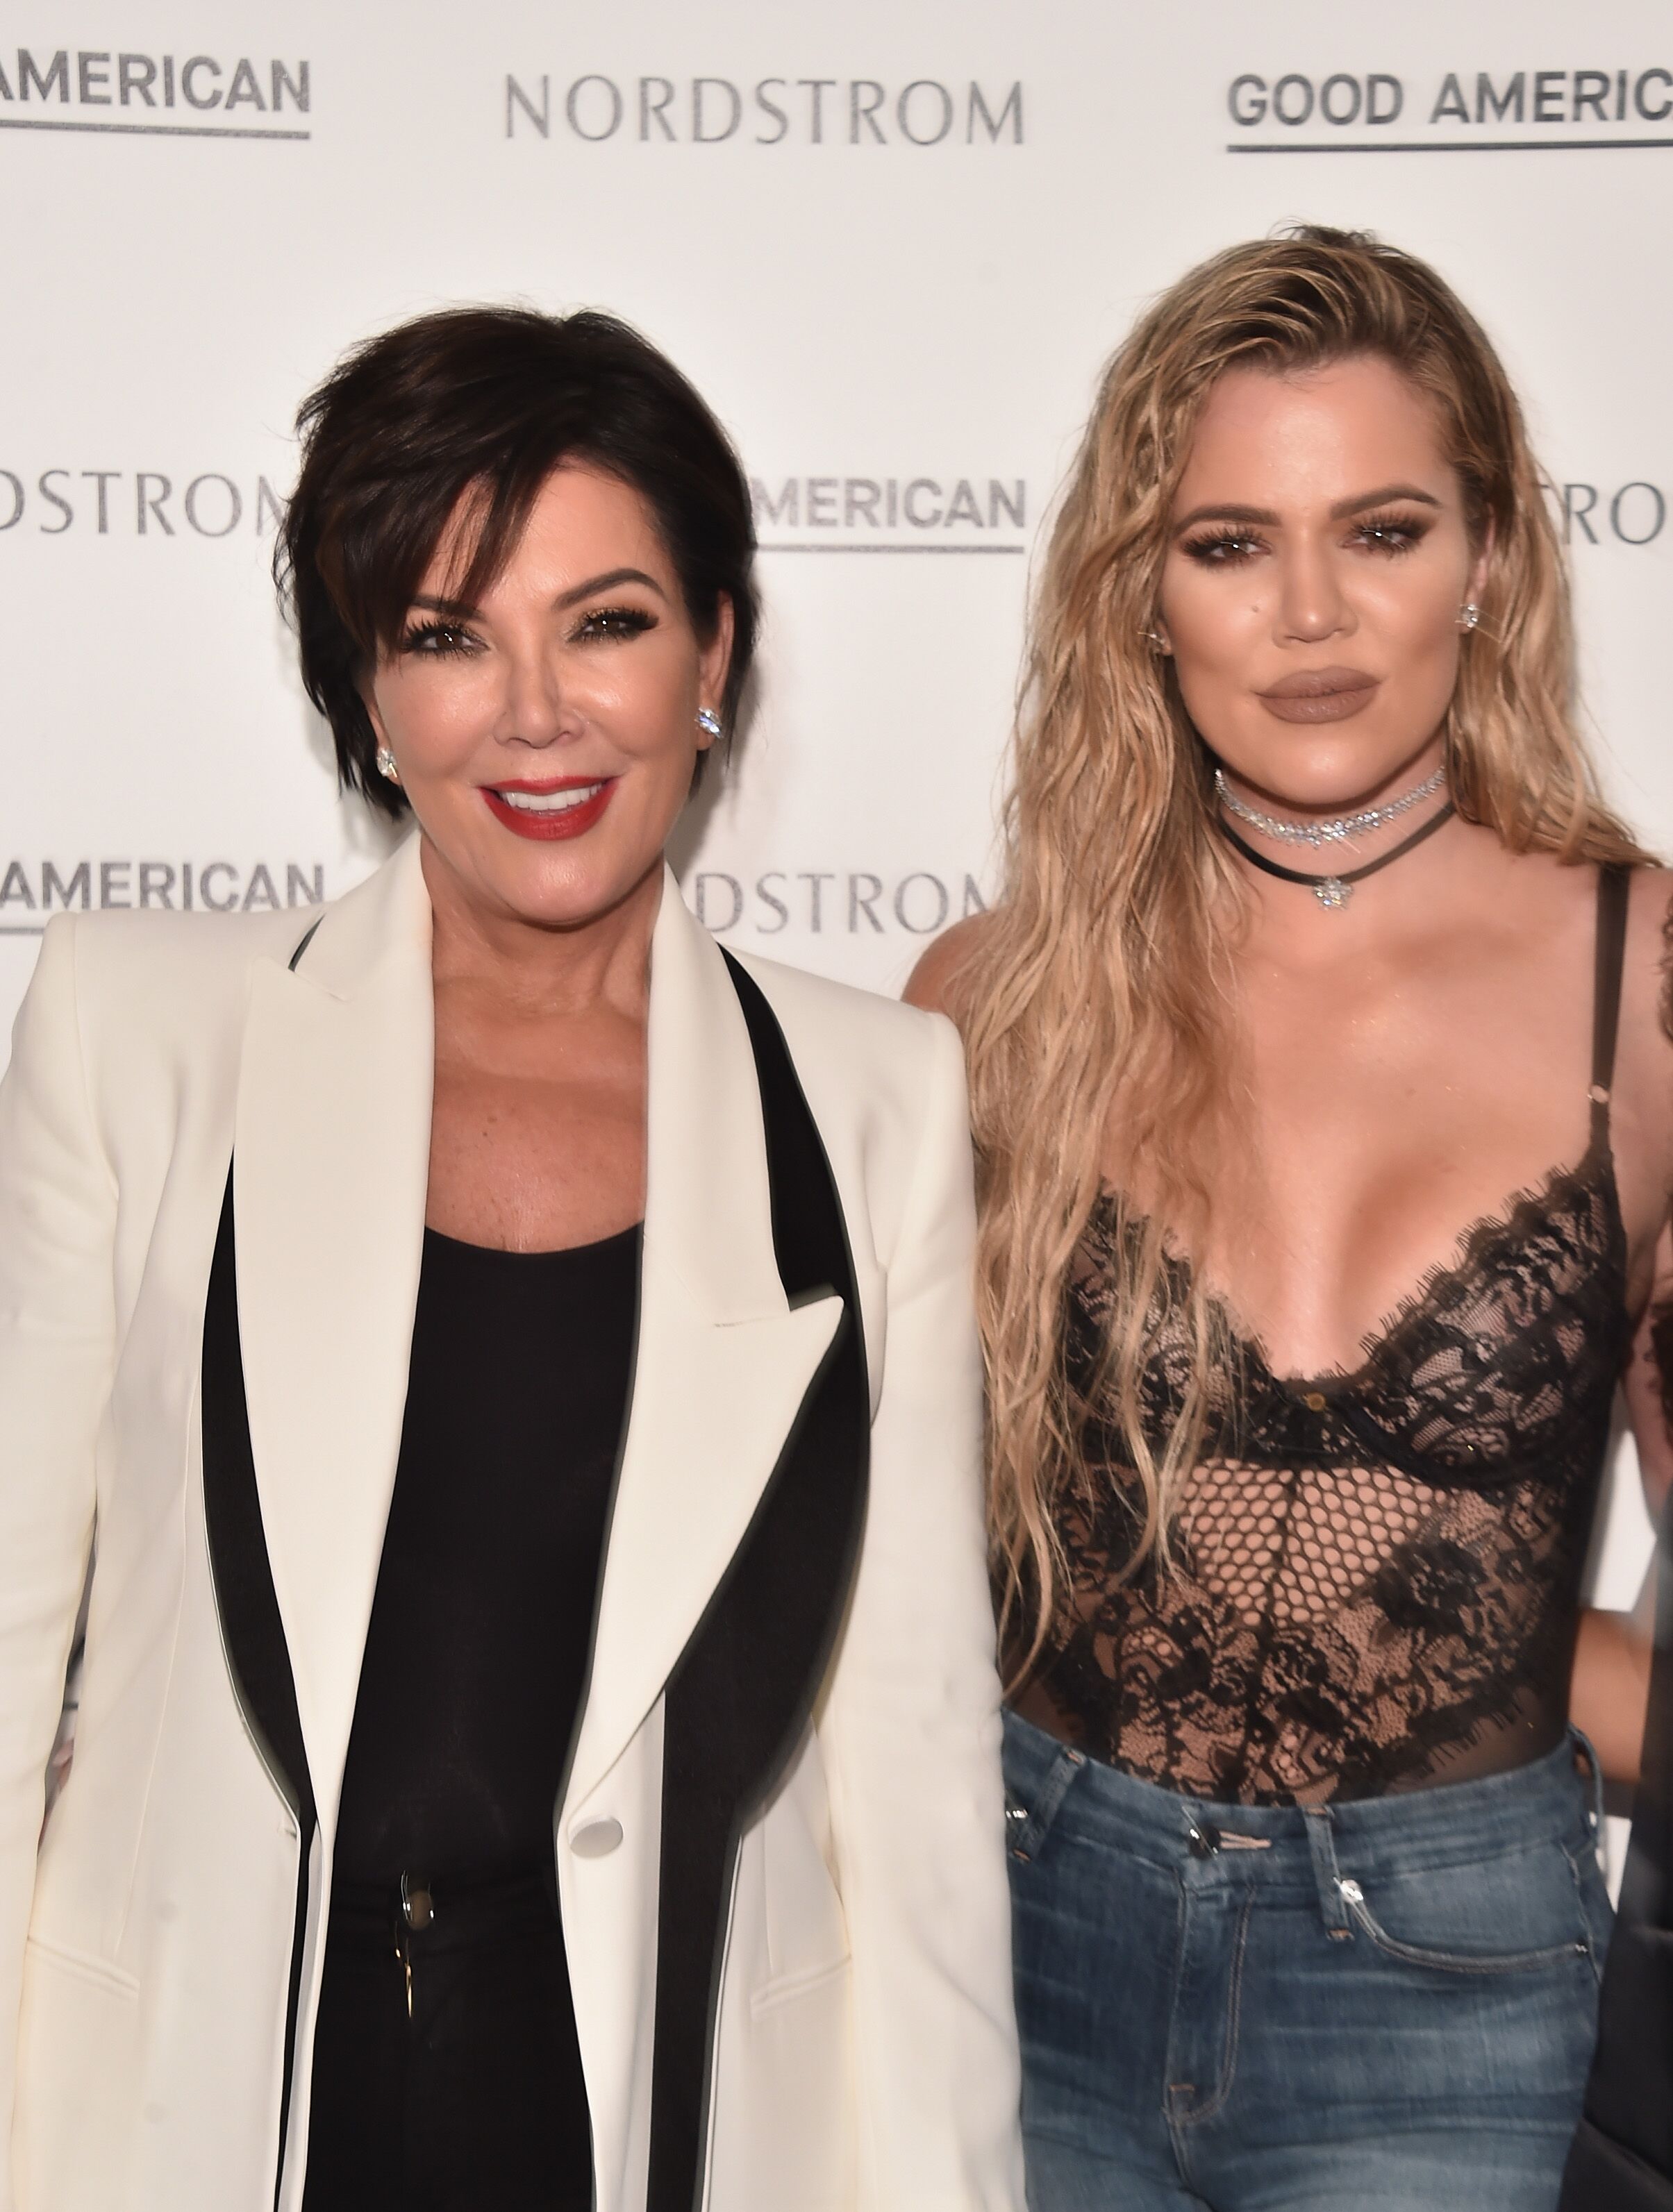 Kris Jenner and Khloe Kardashian at the Khloe Kardashian Good American Launch Event in 2016 in Los Angeles | Source: Getty Images